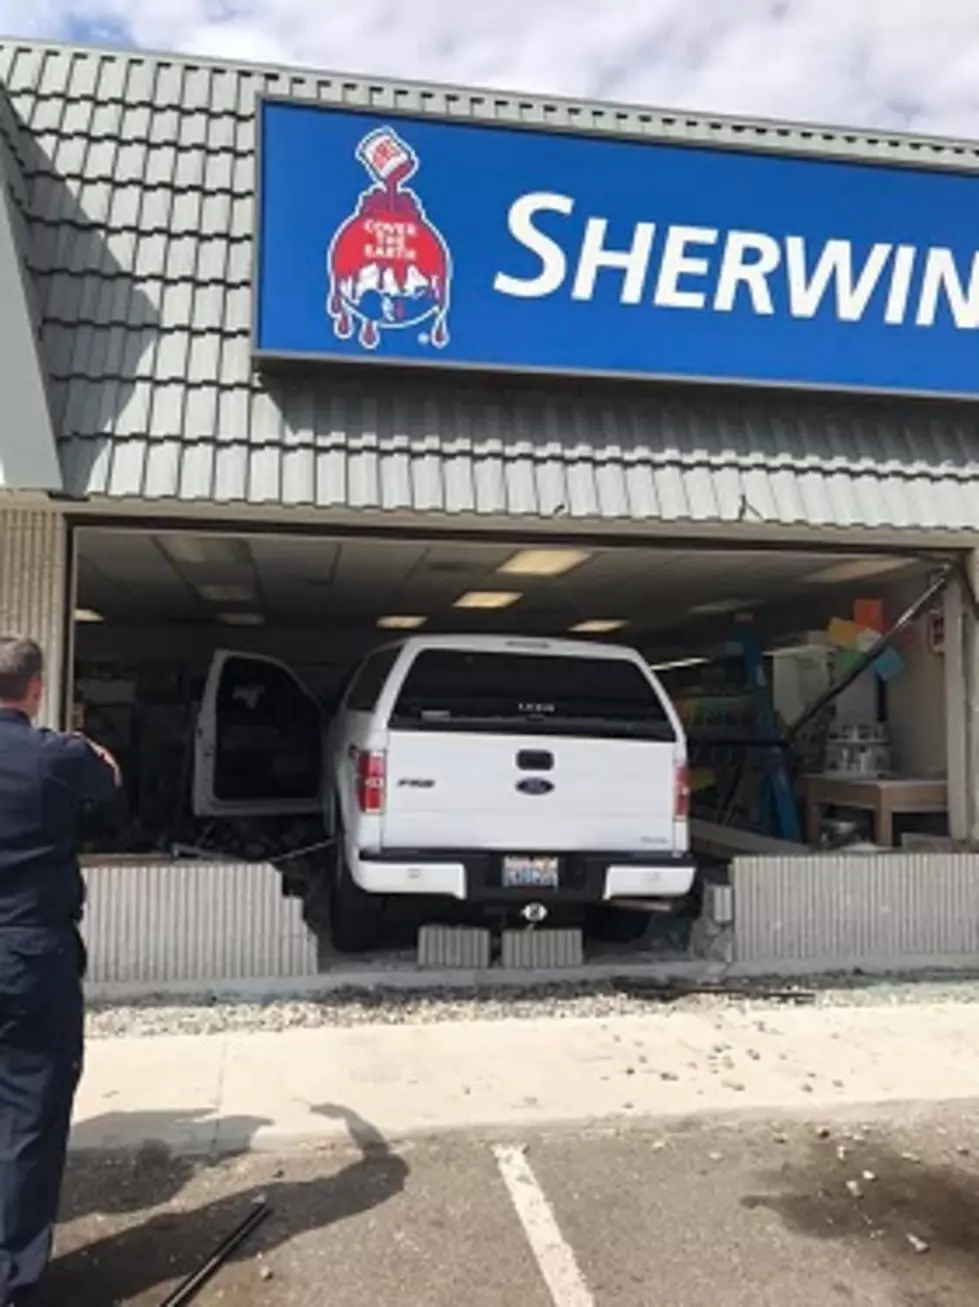 Car Crashes Through Front Lobby Of Sherwin-Williams Store